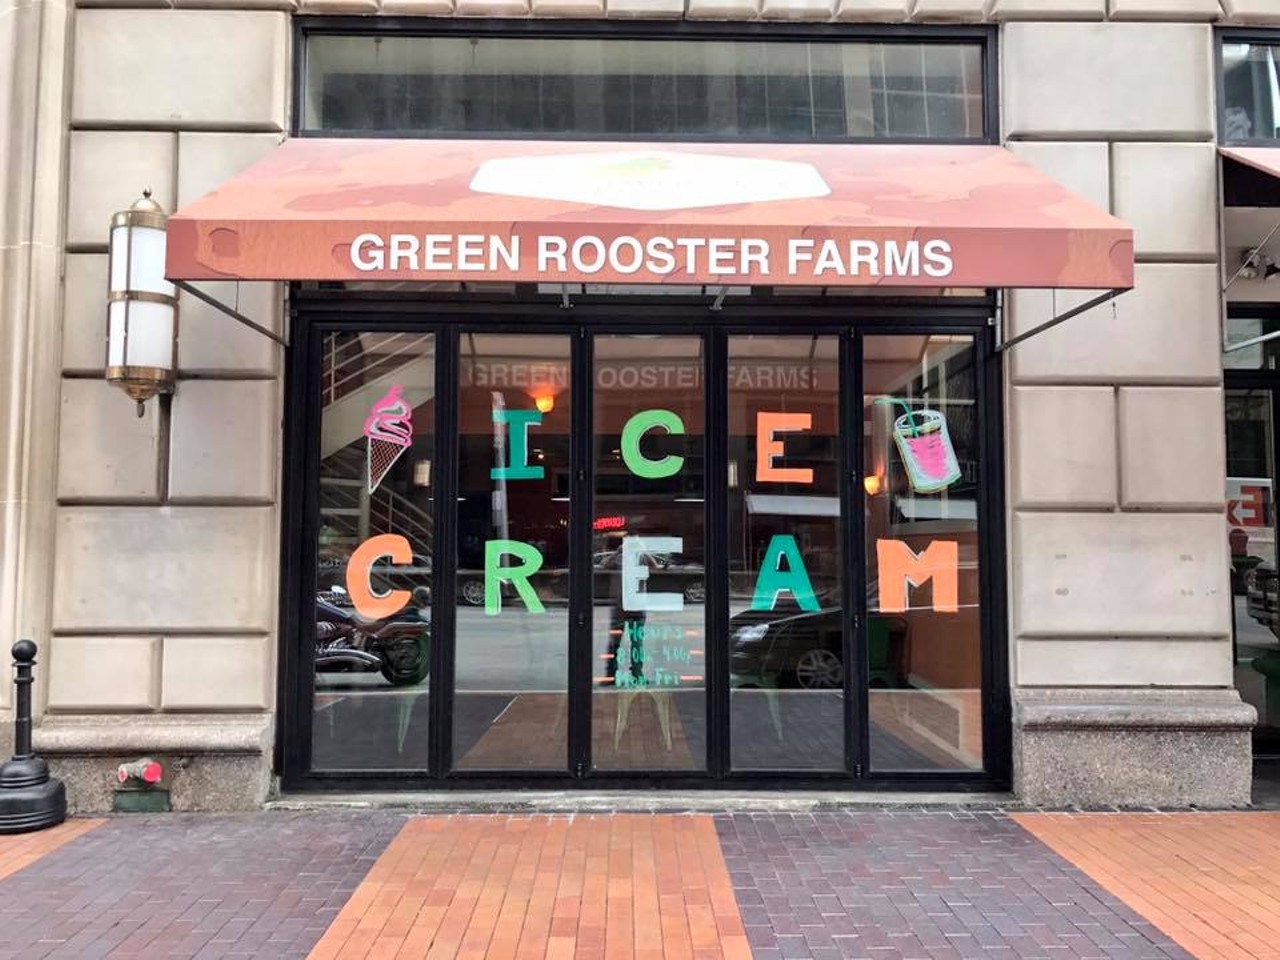  Green Rooster Farms
2033 East 14th St., Cleveland 
Even people who work around the corner might not know this place exists but you’re missing out. The Driftwood Group’s Green Rooster Farms is a cute cafe in the Playhouse Square district that offers healthy, fresh and organic ingredients in their salads, soups, wraps and sandwiches. Their breakfast burrito ($8.99) and their buffalo chicken salad ($10.49) are two of our favorites.